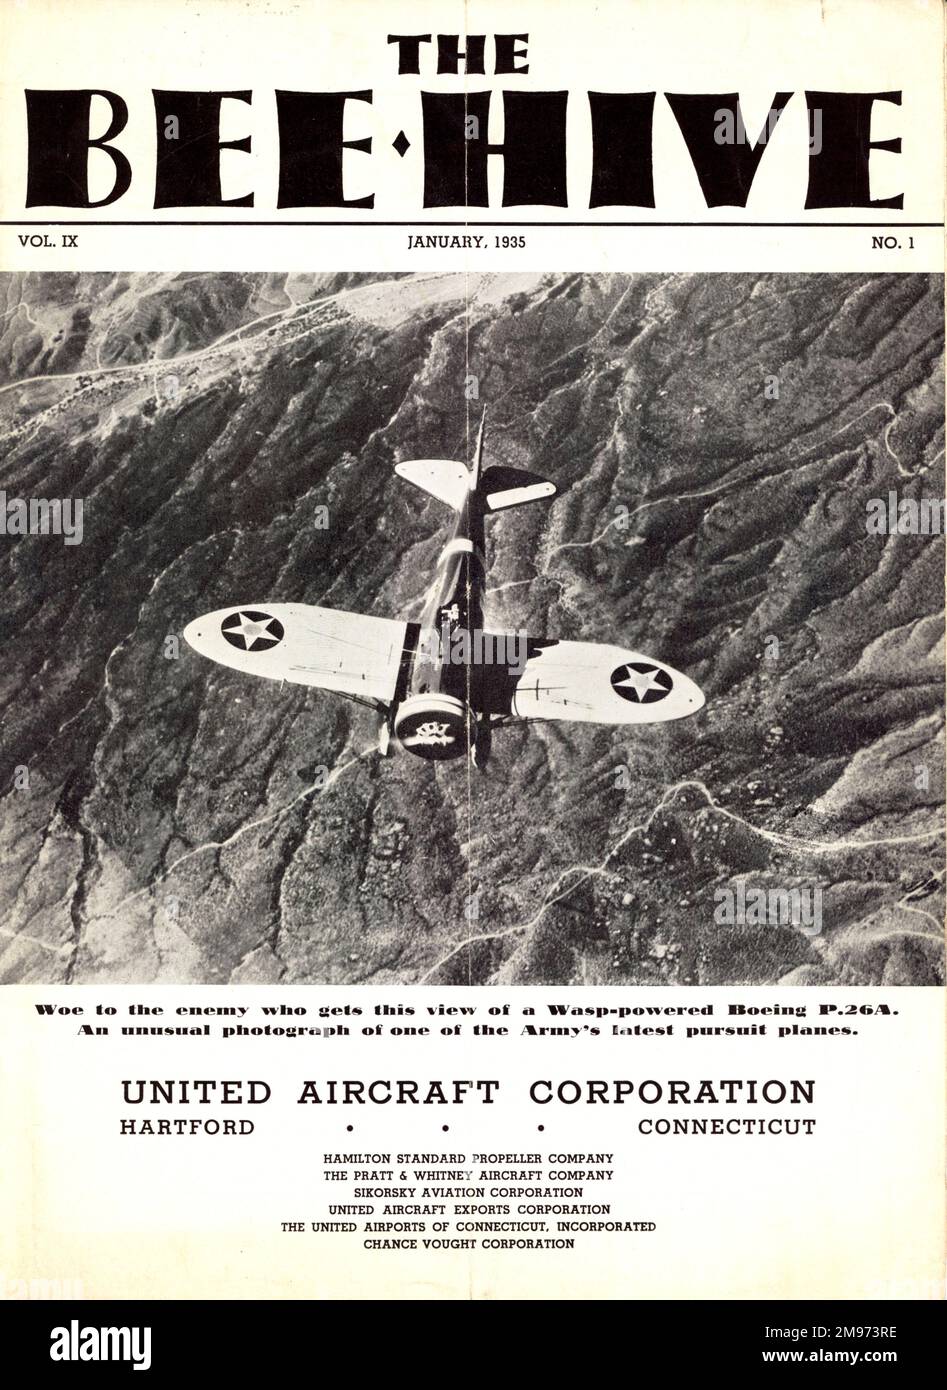 The front cover of The Bee Hive, volume IX, Number 1, January 1935, published by the United Aircraft Corporation for the employees of its subsidiaries. Stock Photo